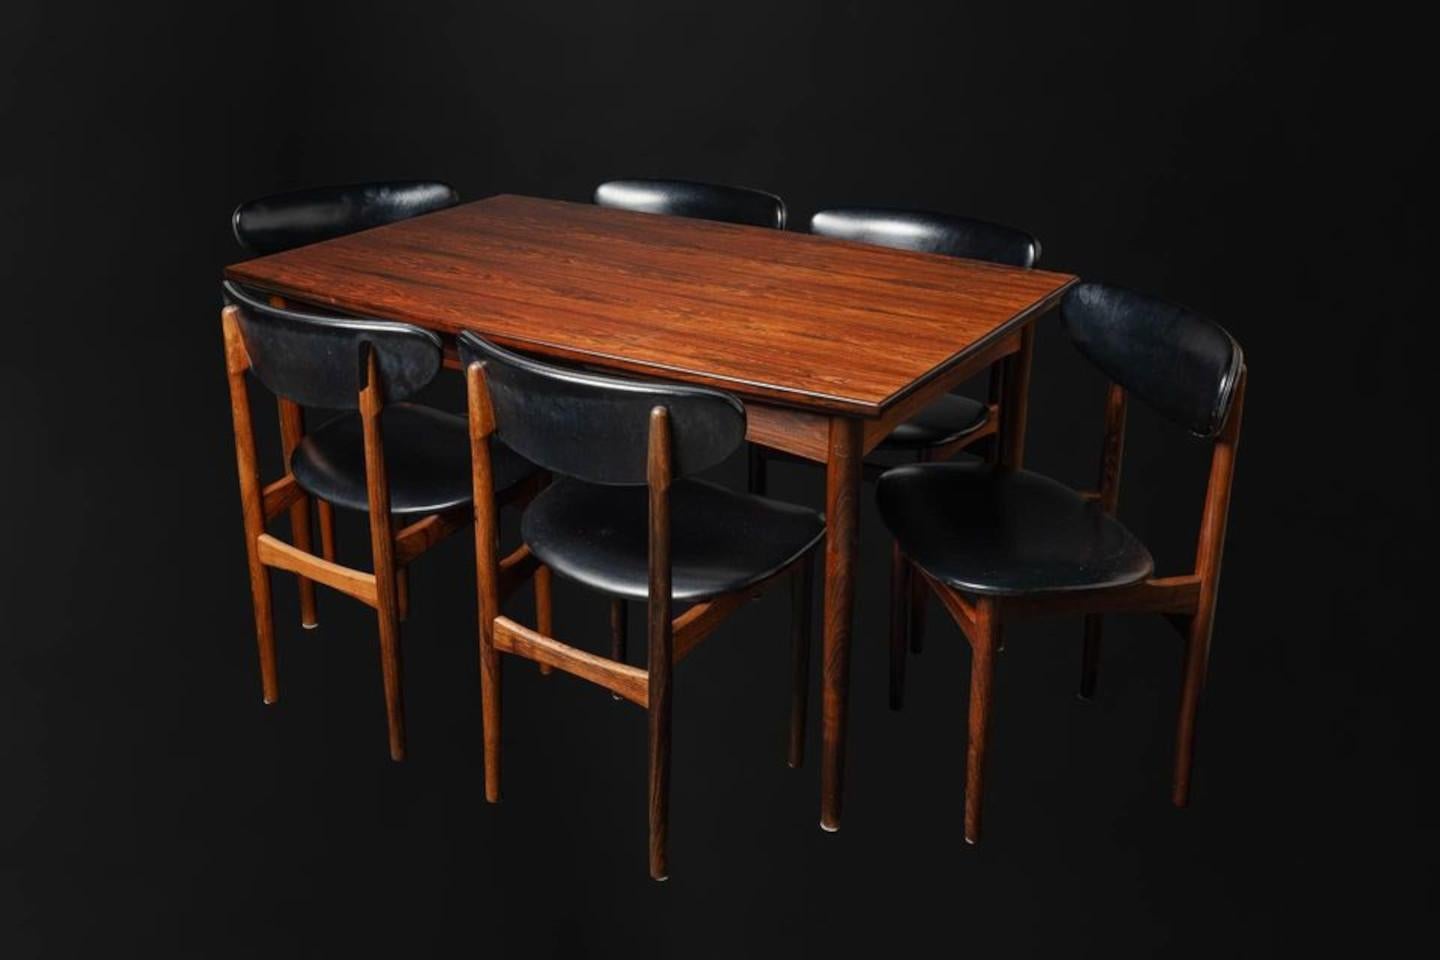 Exceptional Brazilian rosewood dining set made in Denmark in the early 1960s, this lovely seat features a draw leaf dining table and set of six chairs. The dining table is freshly restored and showcases exquisite graining of a rare wood that is no